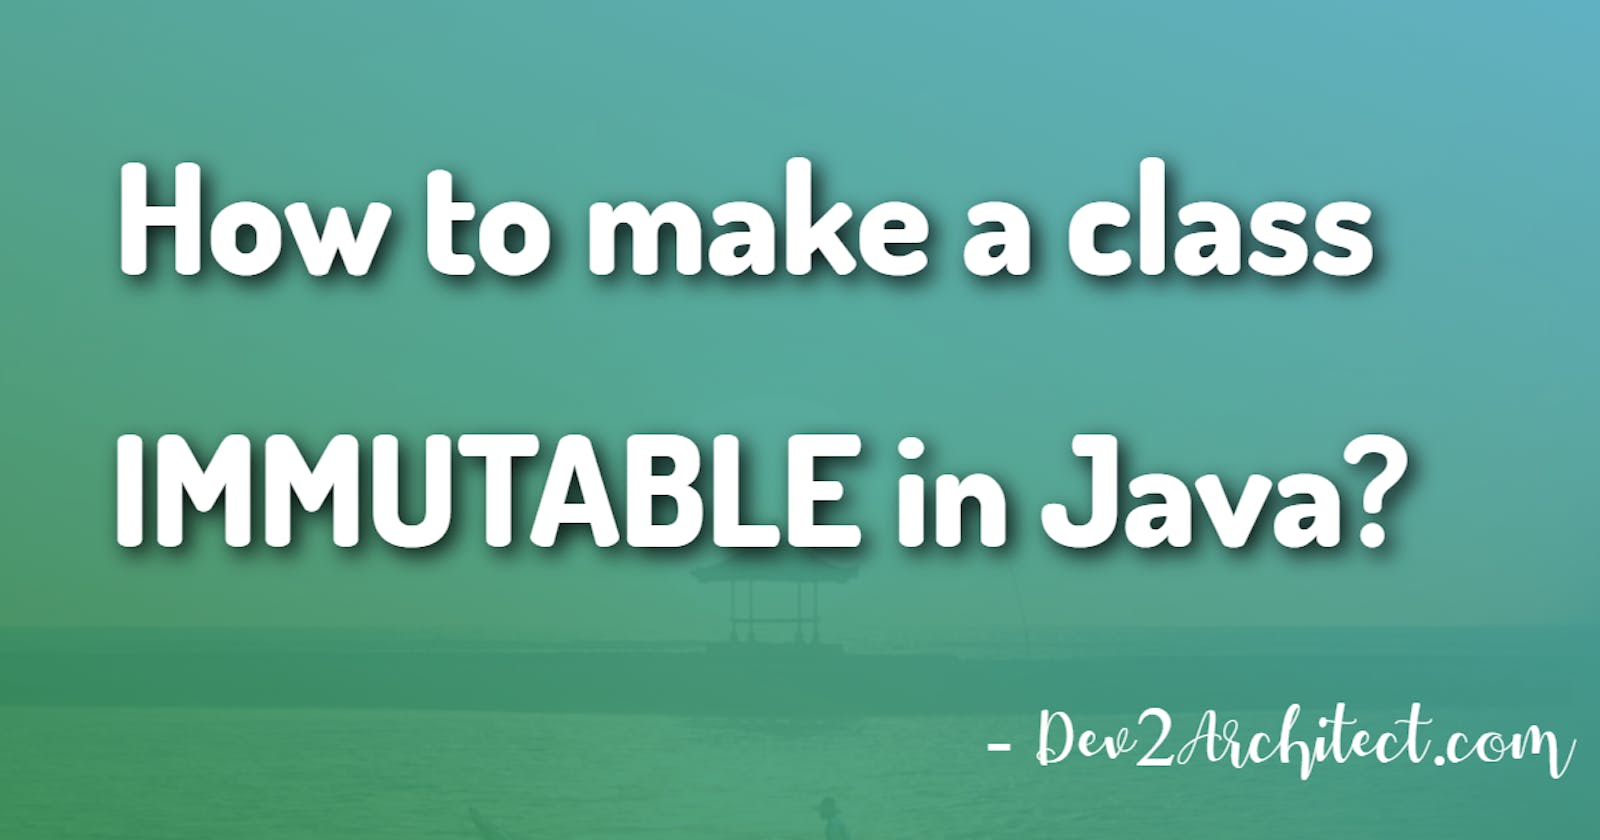 How to make a class IMMUTABLE in Java